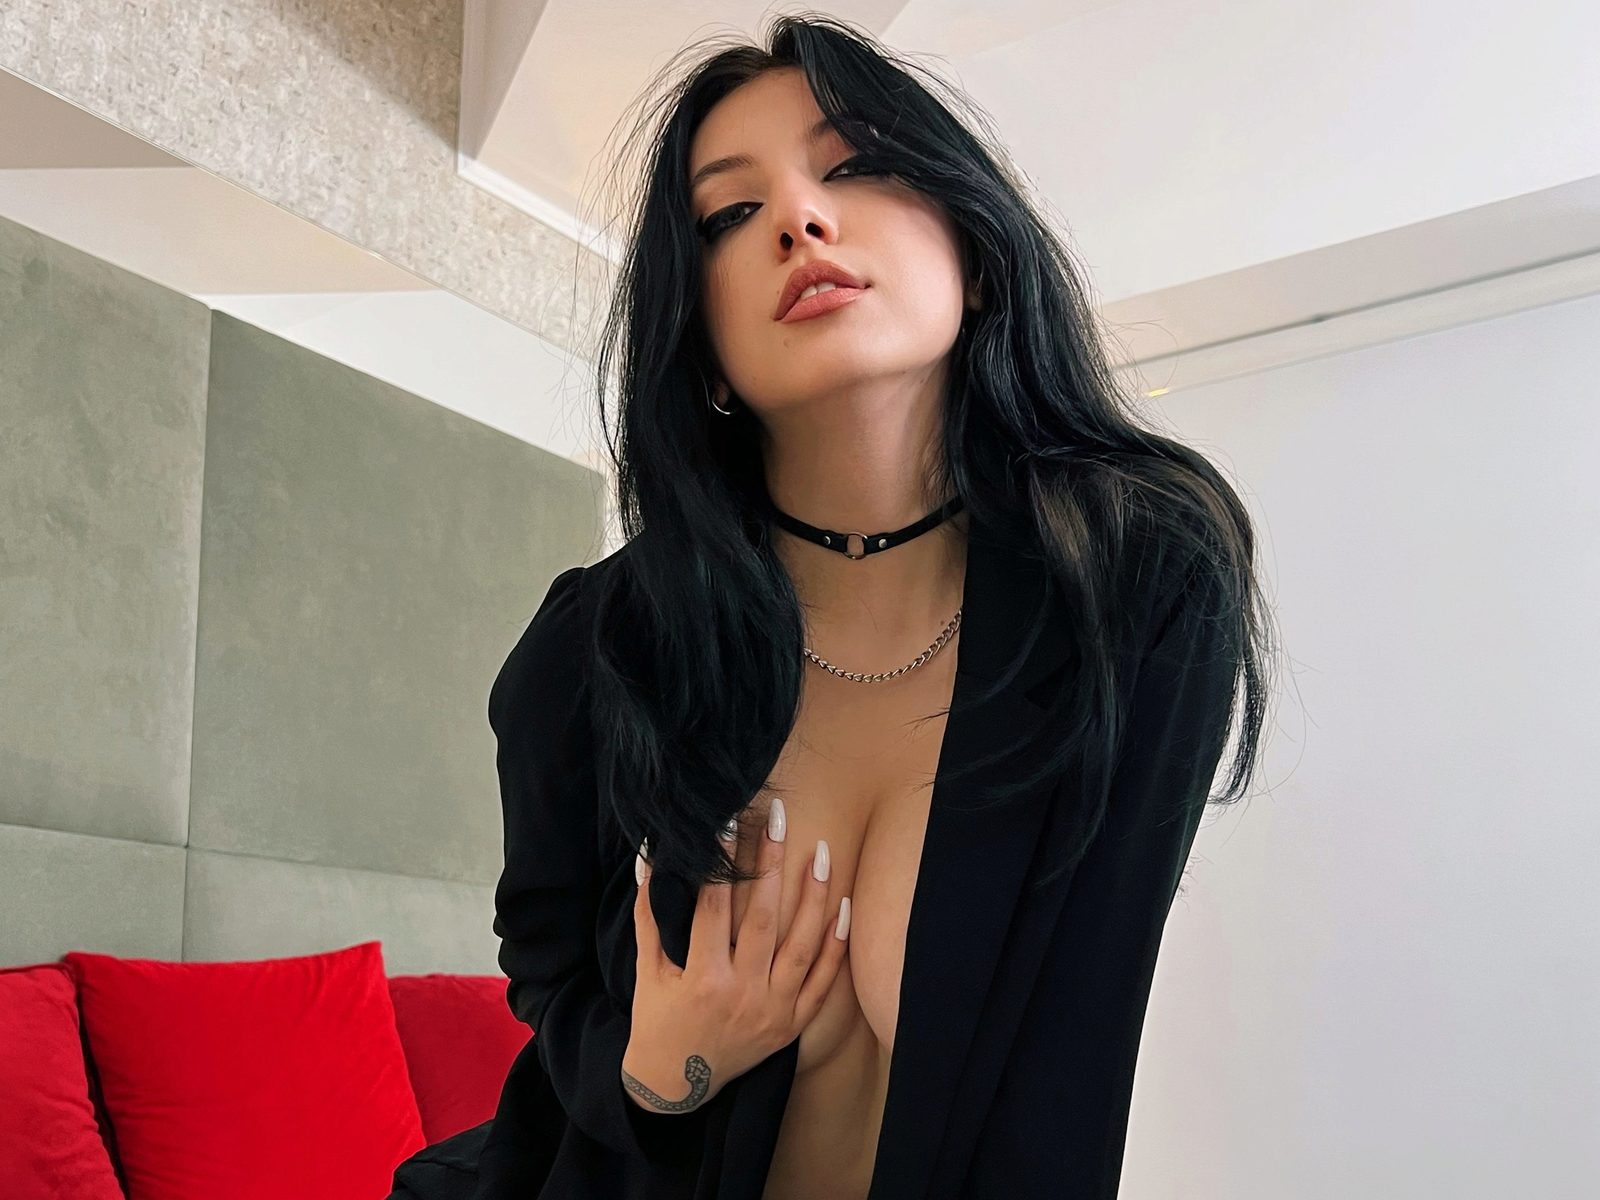 Sophia-vain is her her model name on stripchat and she shows you everything she has. Ass, tits, sexy body, this could be the girl you are looking for to spend a great time!